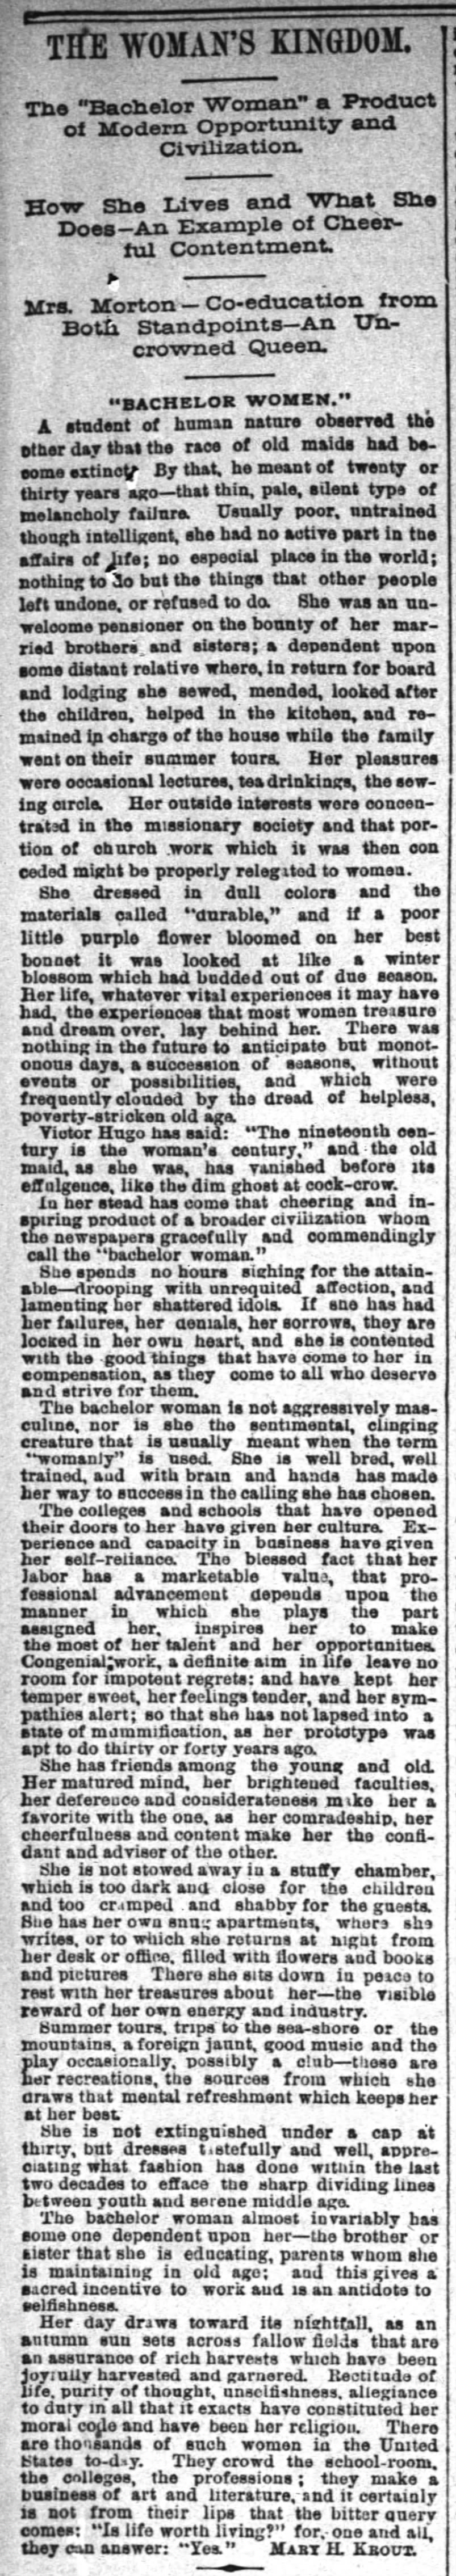 "Bachelor women" replace old maids, 1889